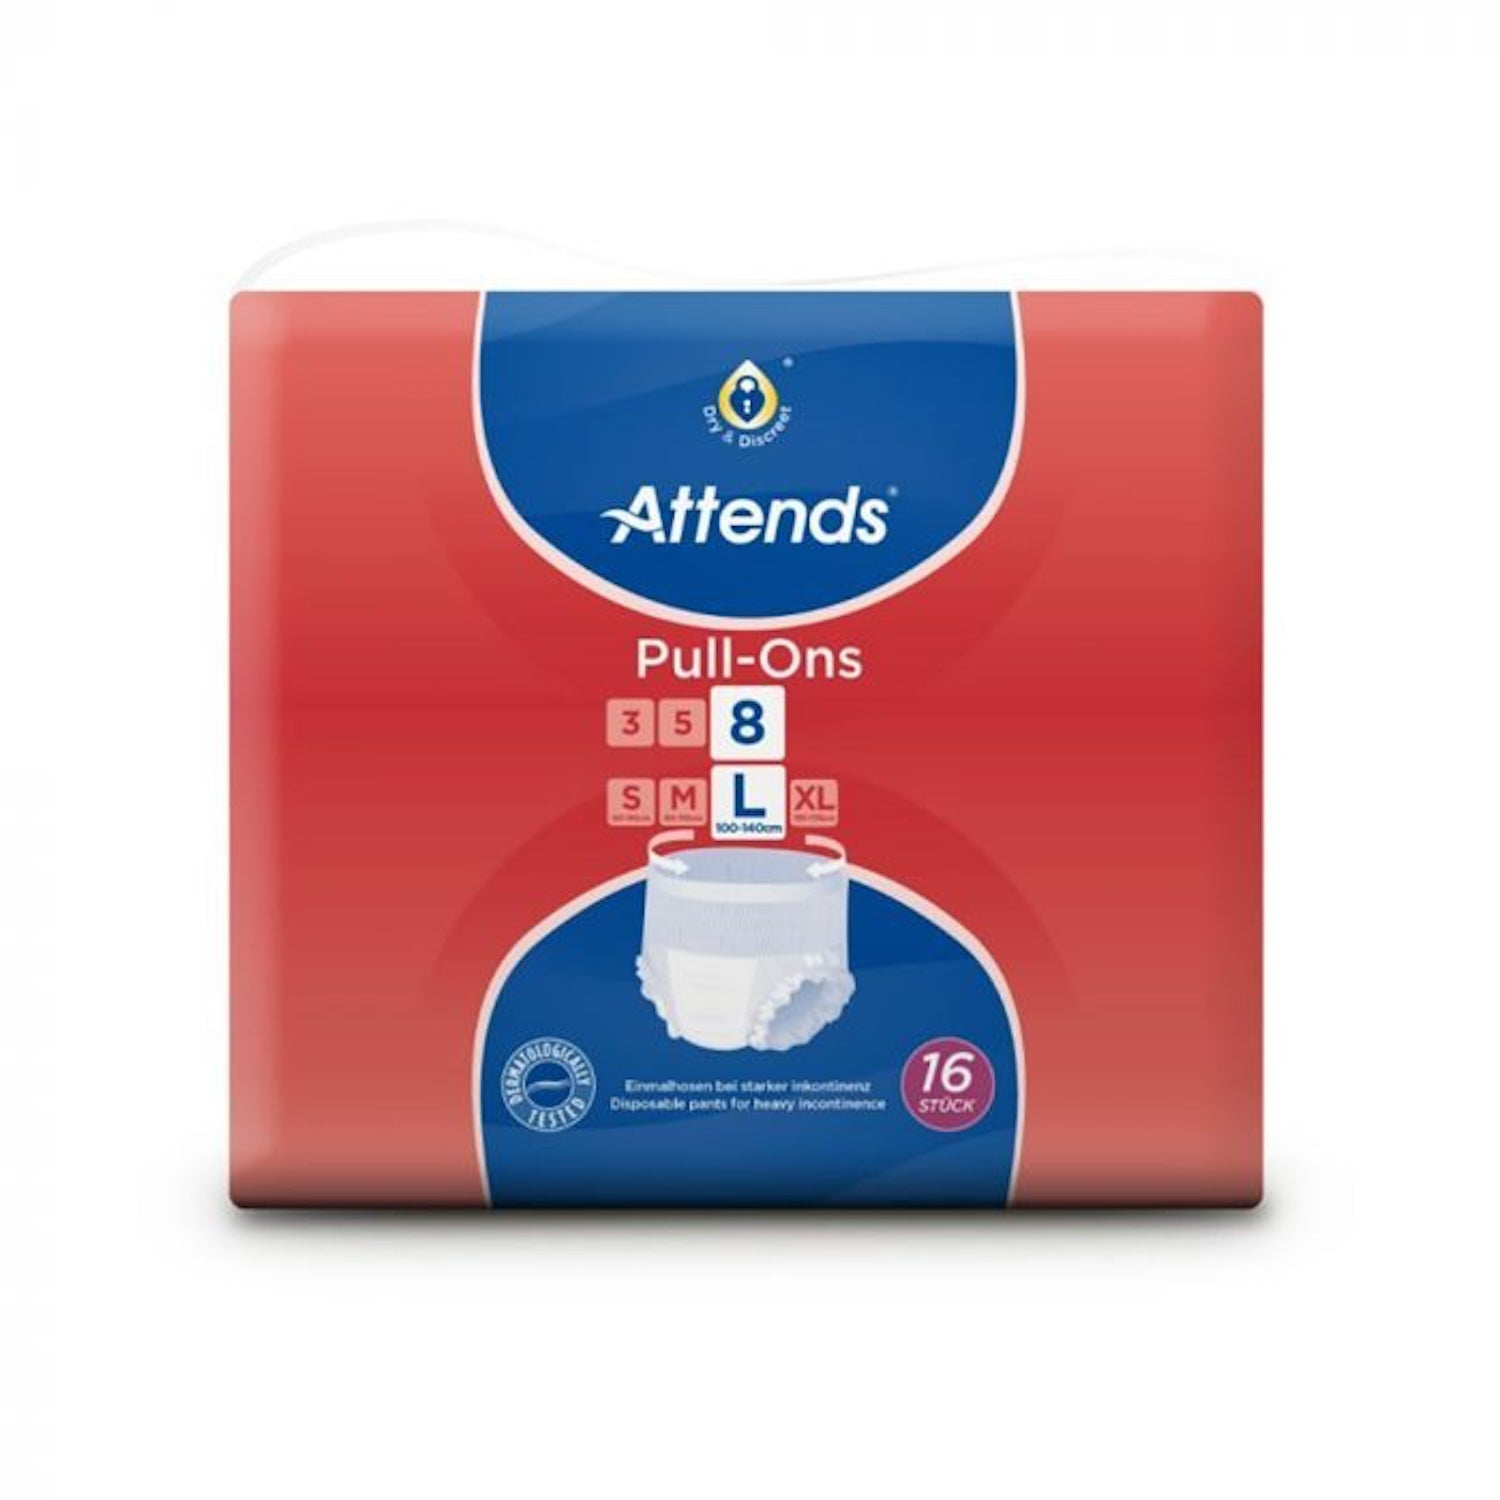 Attends Pull-Ons 8 Large | Pack of 16 (1)